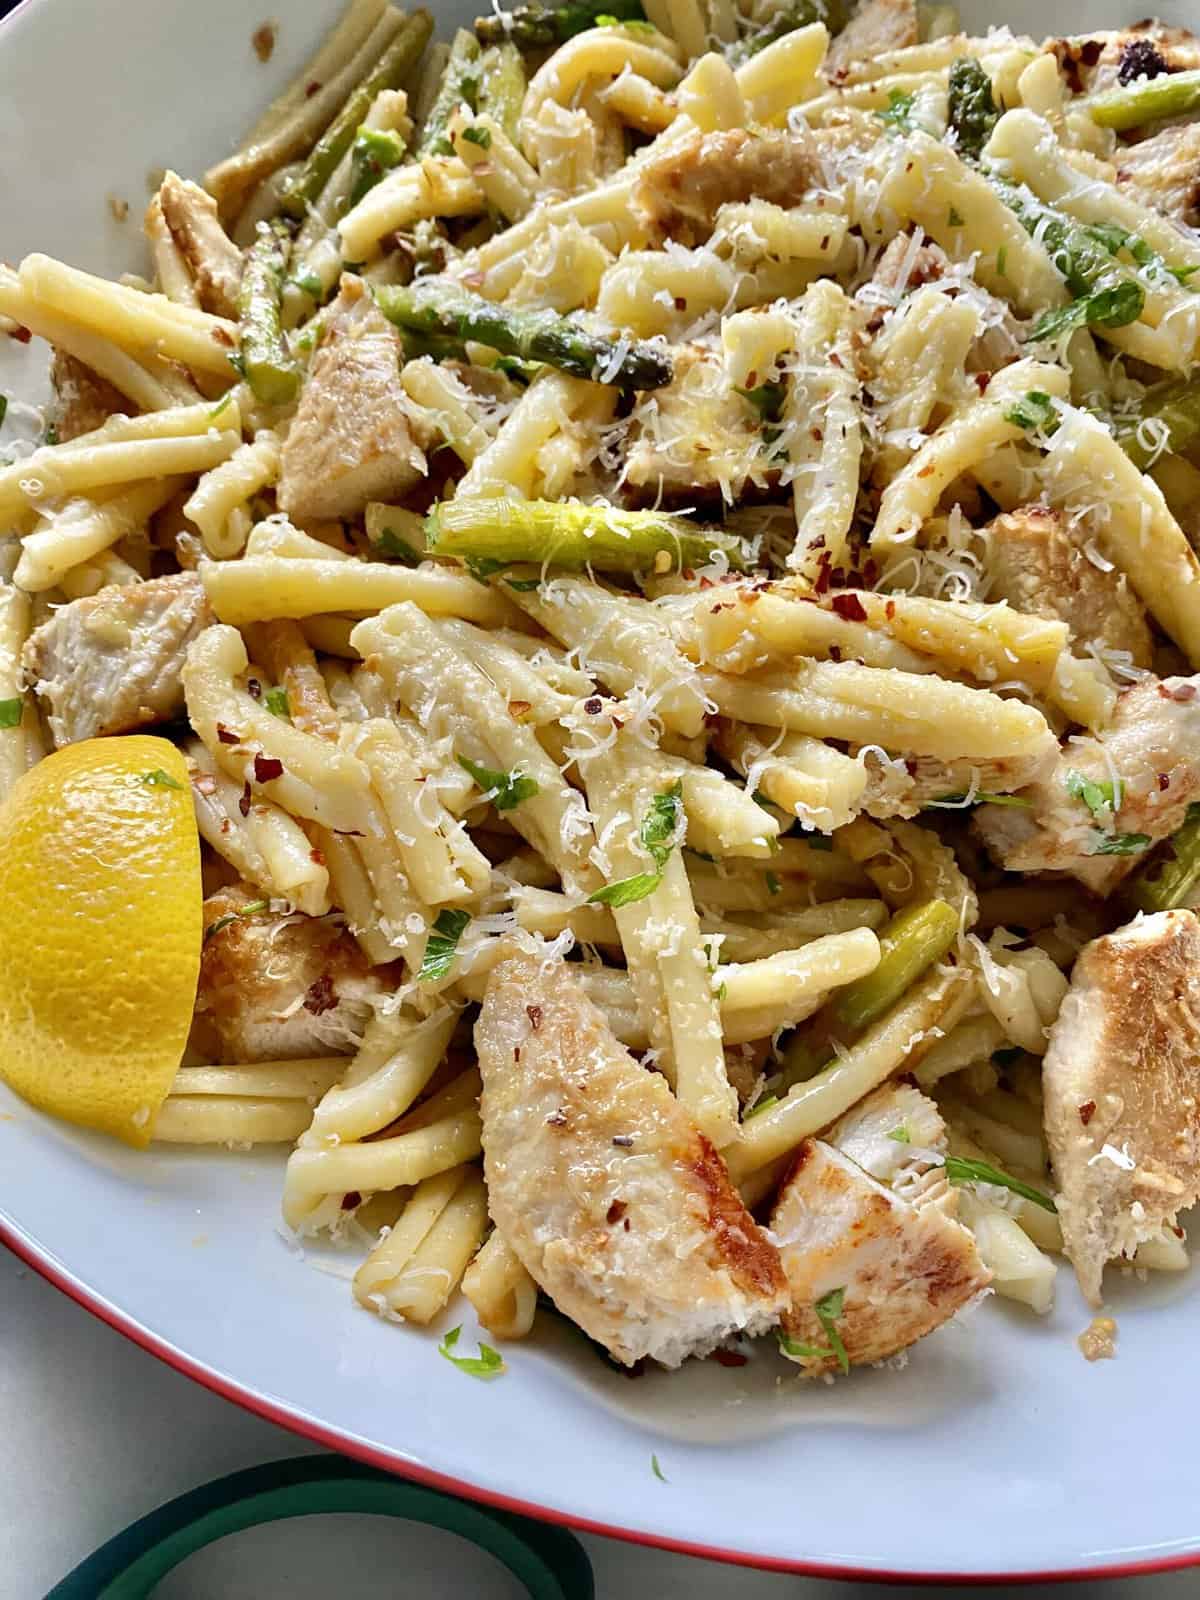 The Great Pasta Question and Lemony Chicken and Vegetable Pasta